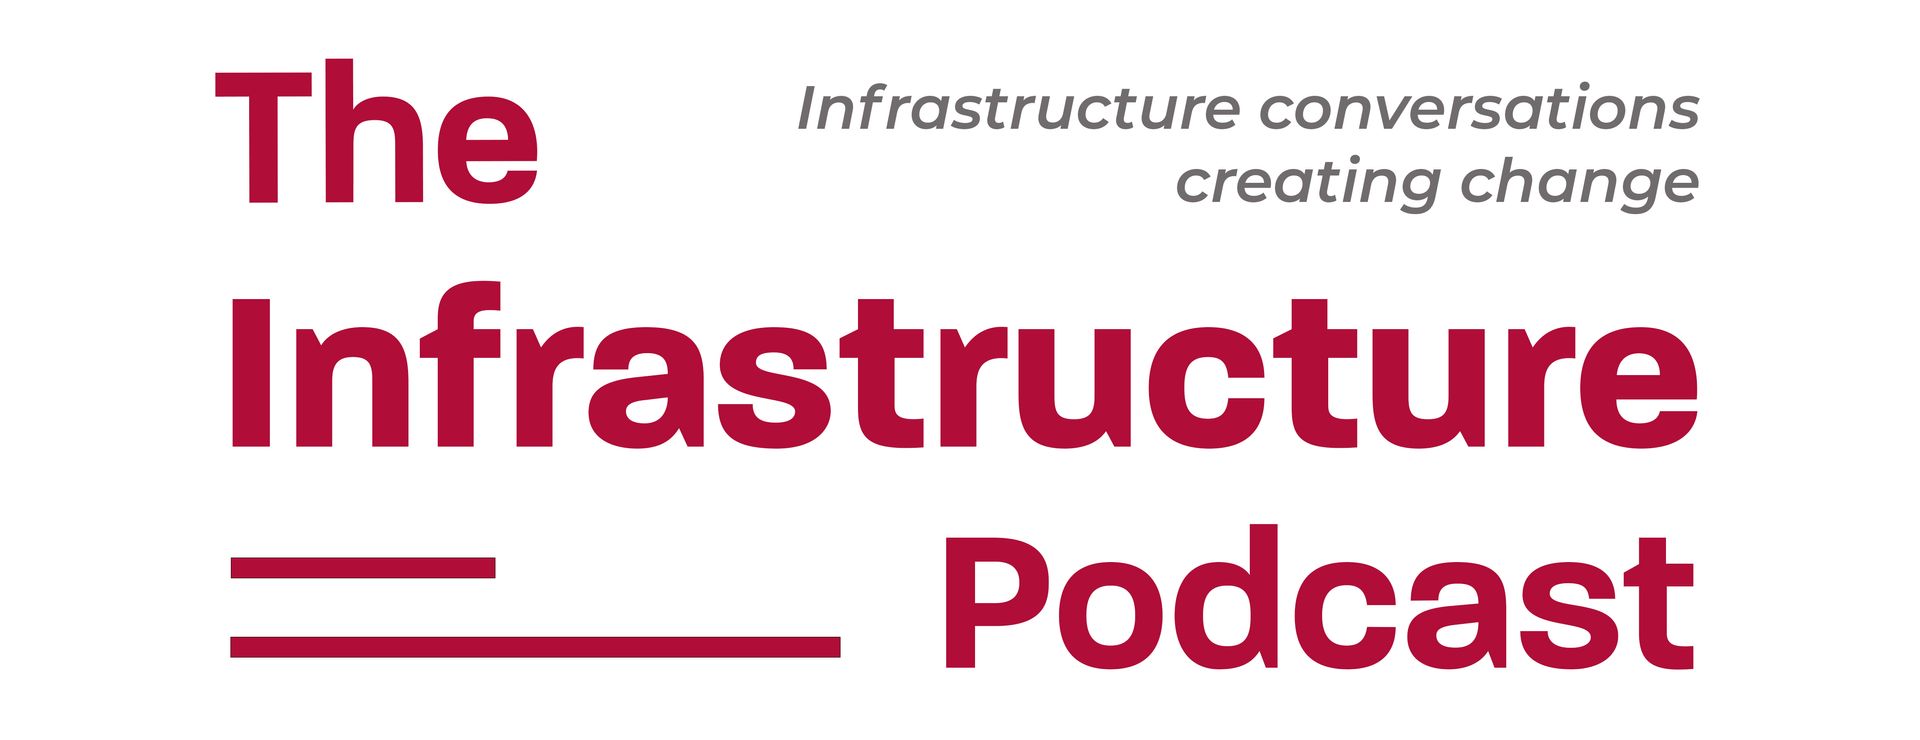 Infrastructure Podcast